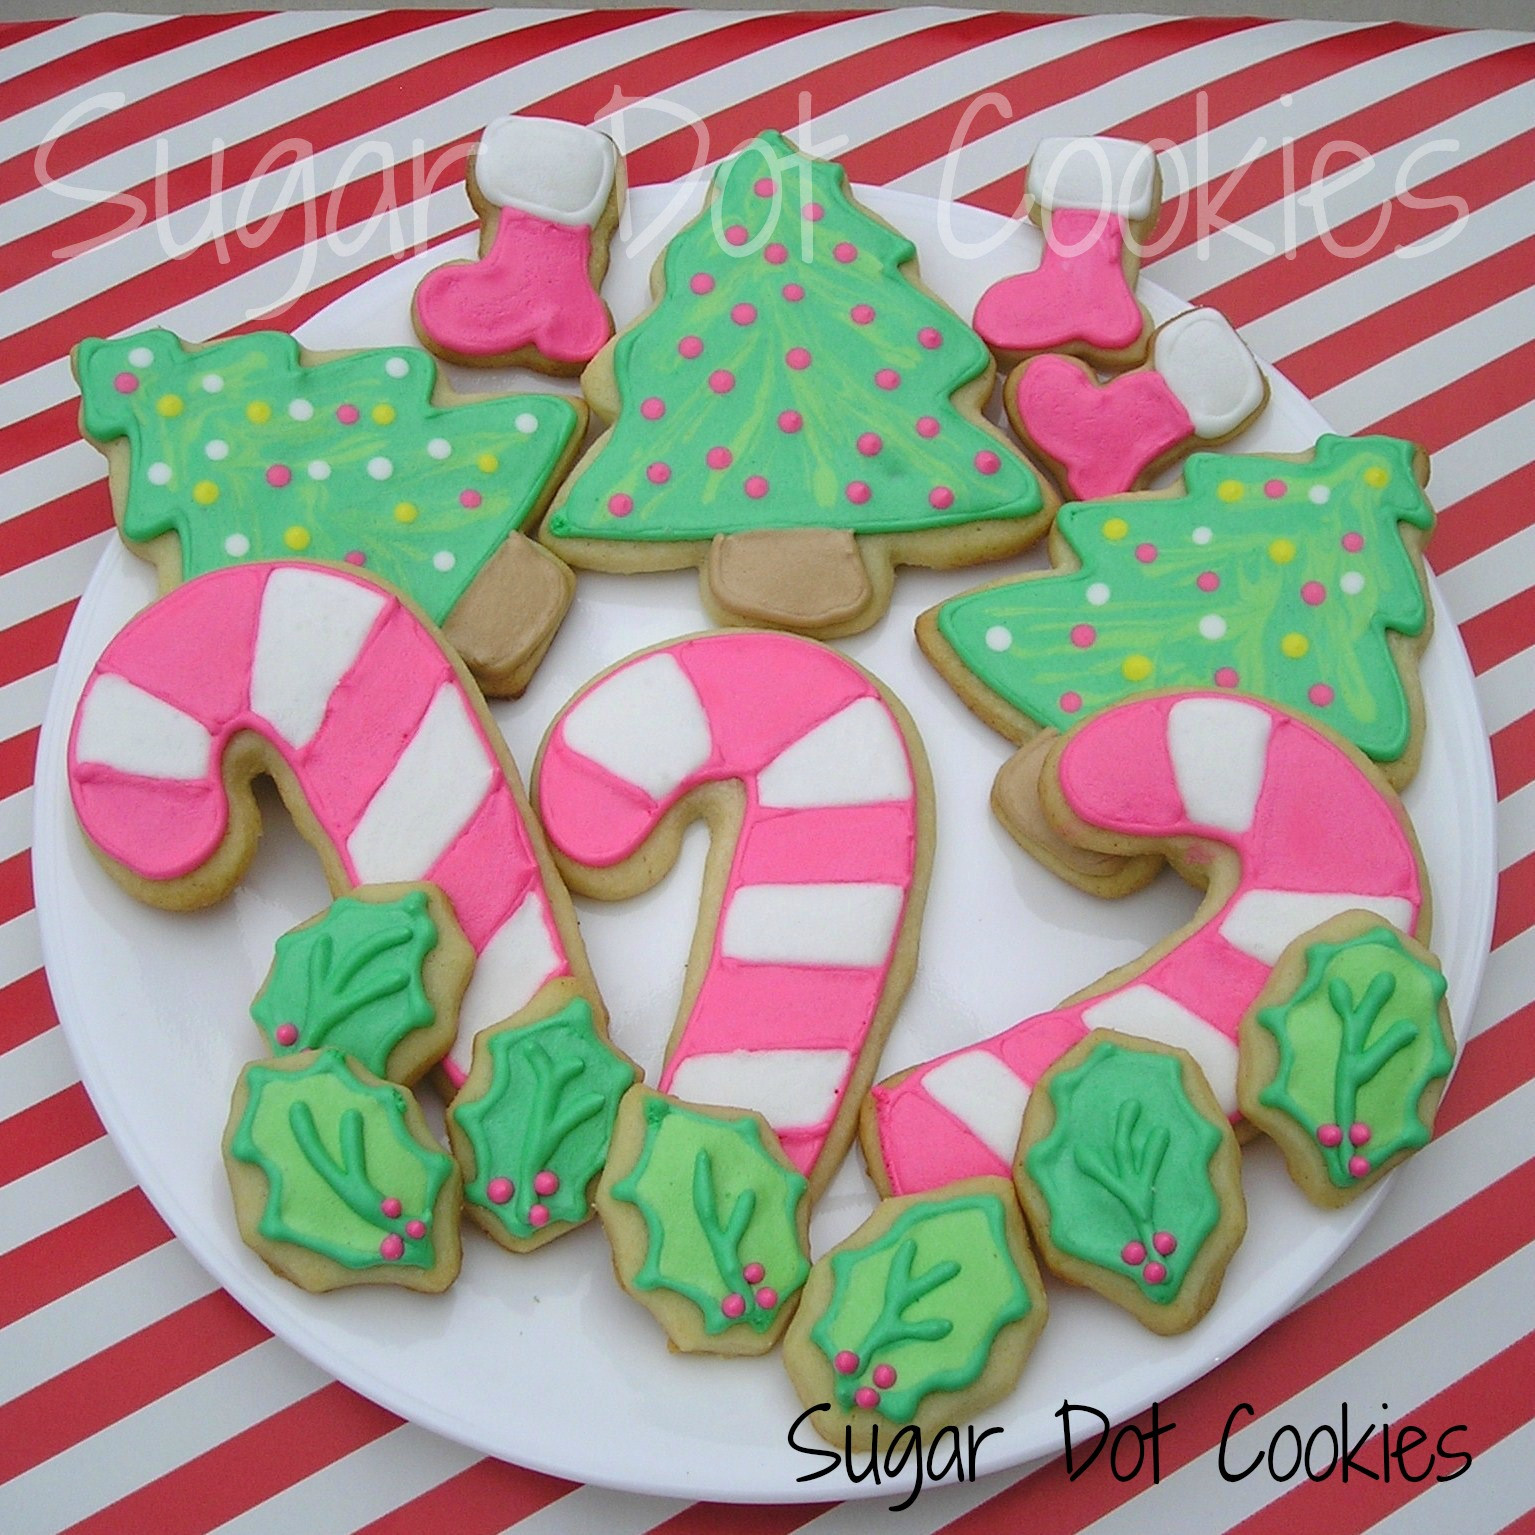 Christmas Sugar Cookies With Royal Icing
 Would you like to see last year s collection My first